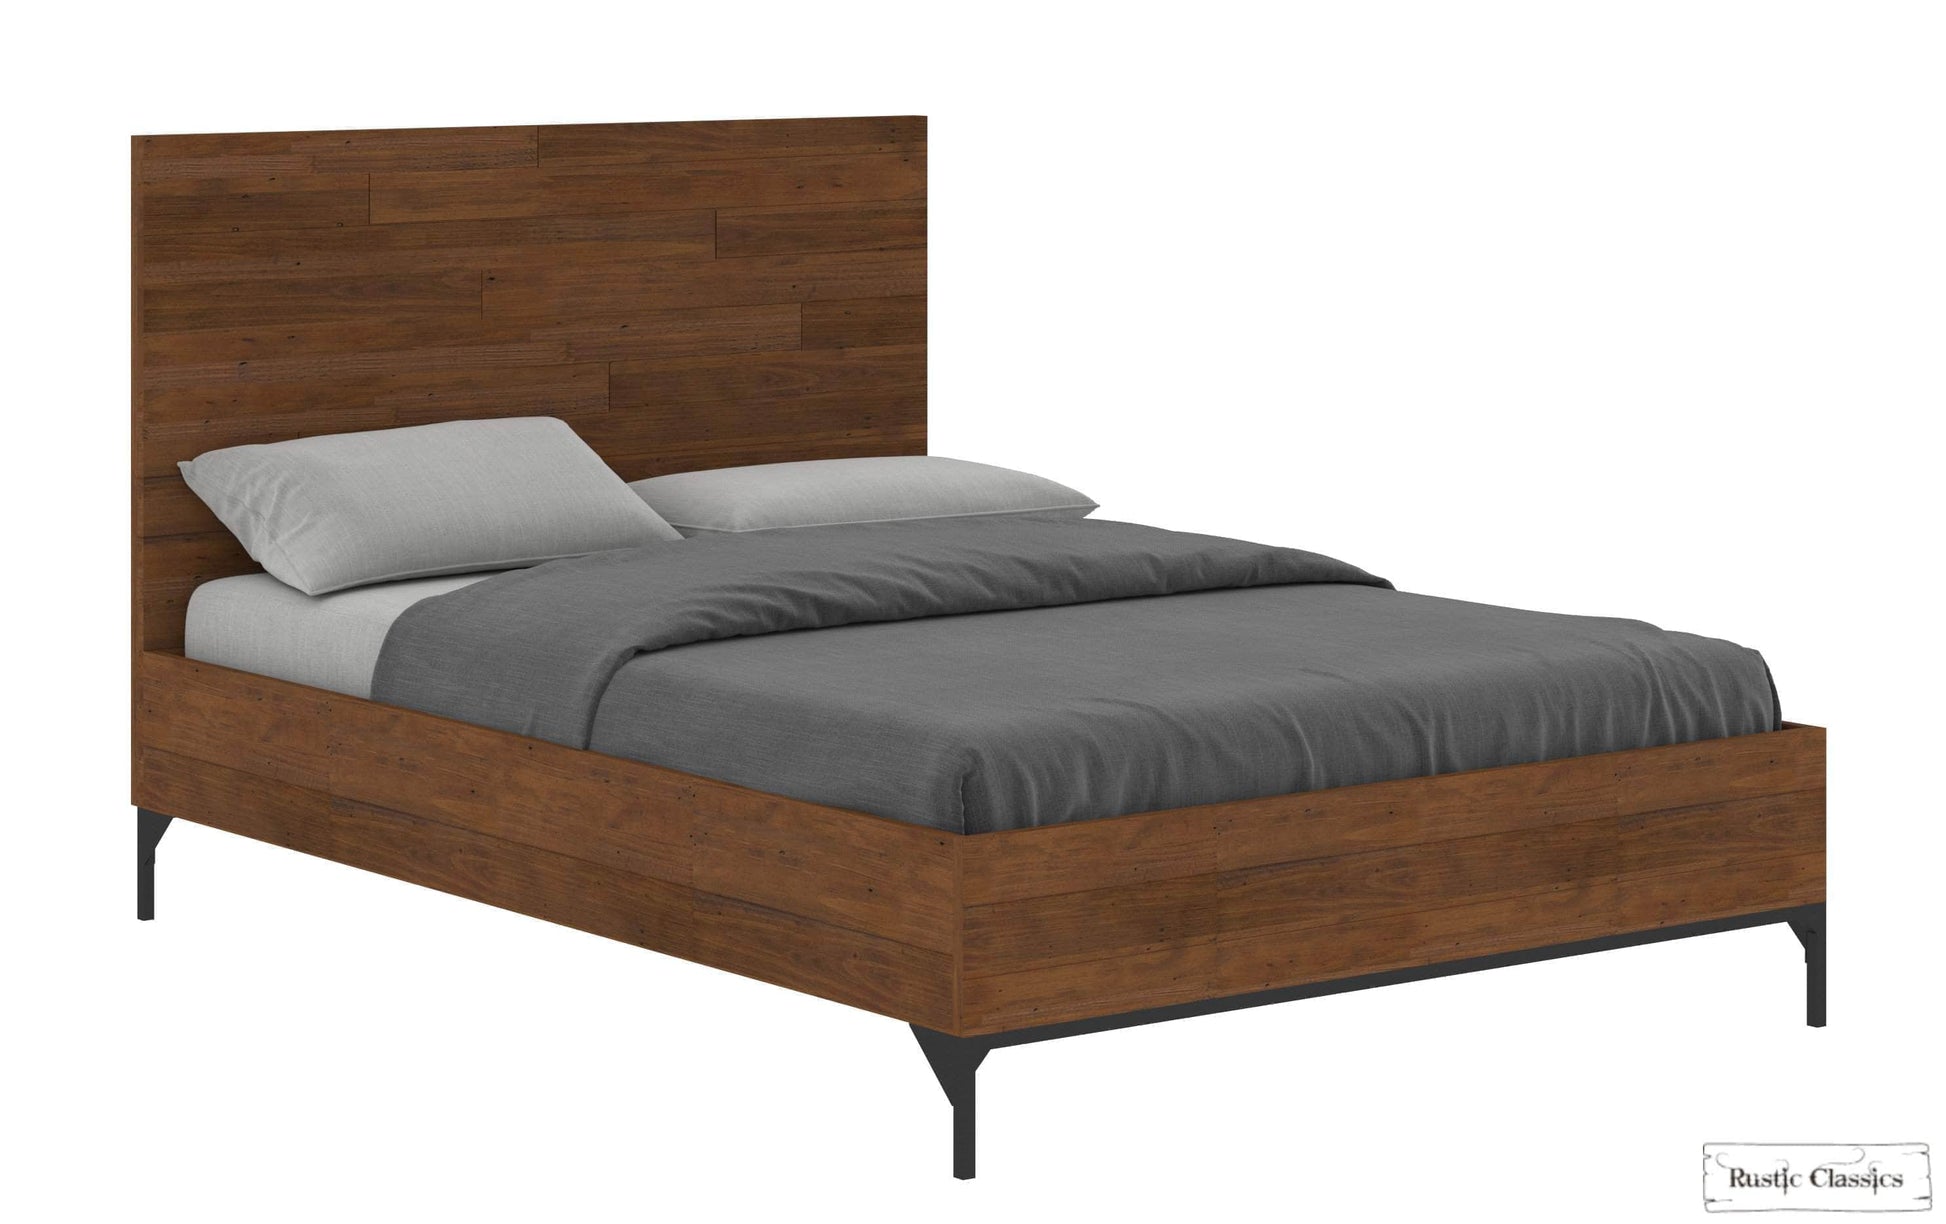 Rustic Classics Bedroom Set Blackcomb 4 Piece Reclaimed Wood and Metal Platform Bedroom Furniture Set in Coffee Bean - Available in 2 Sizes